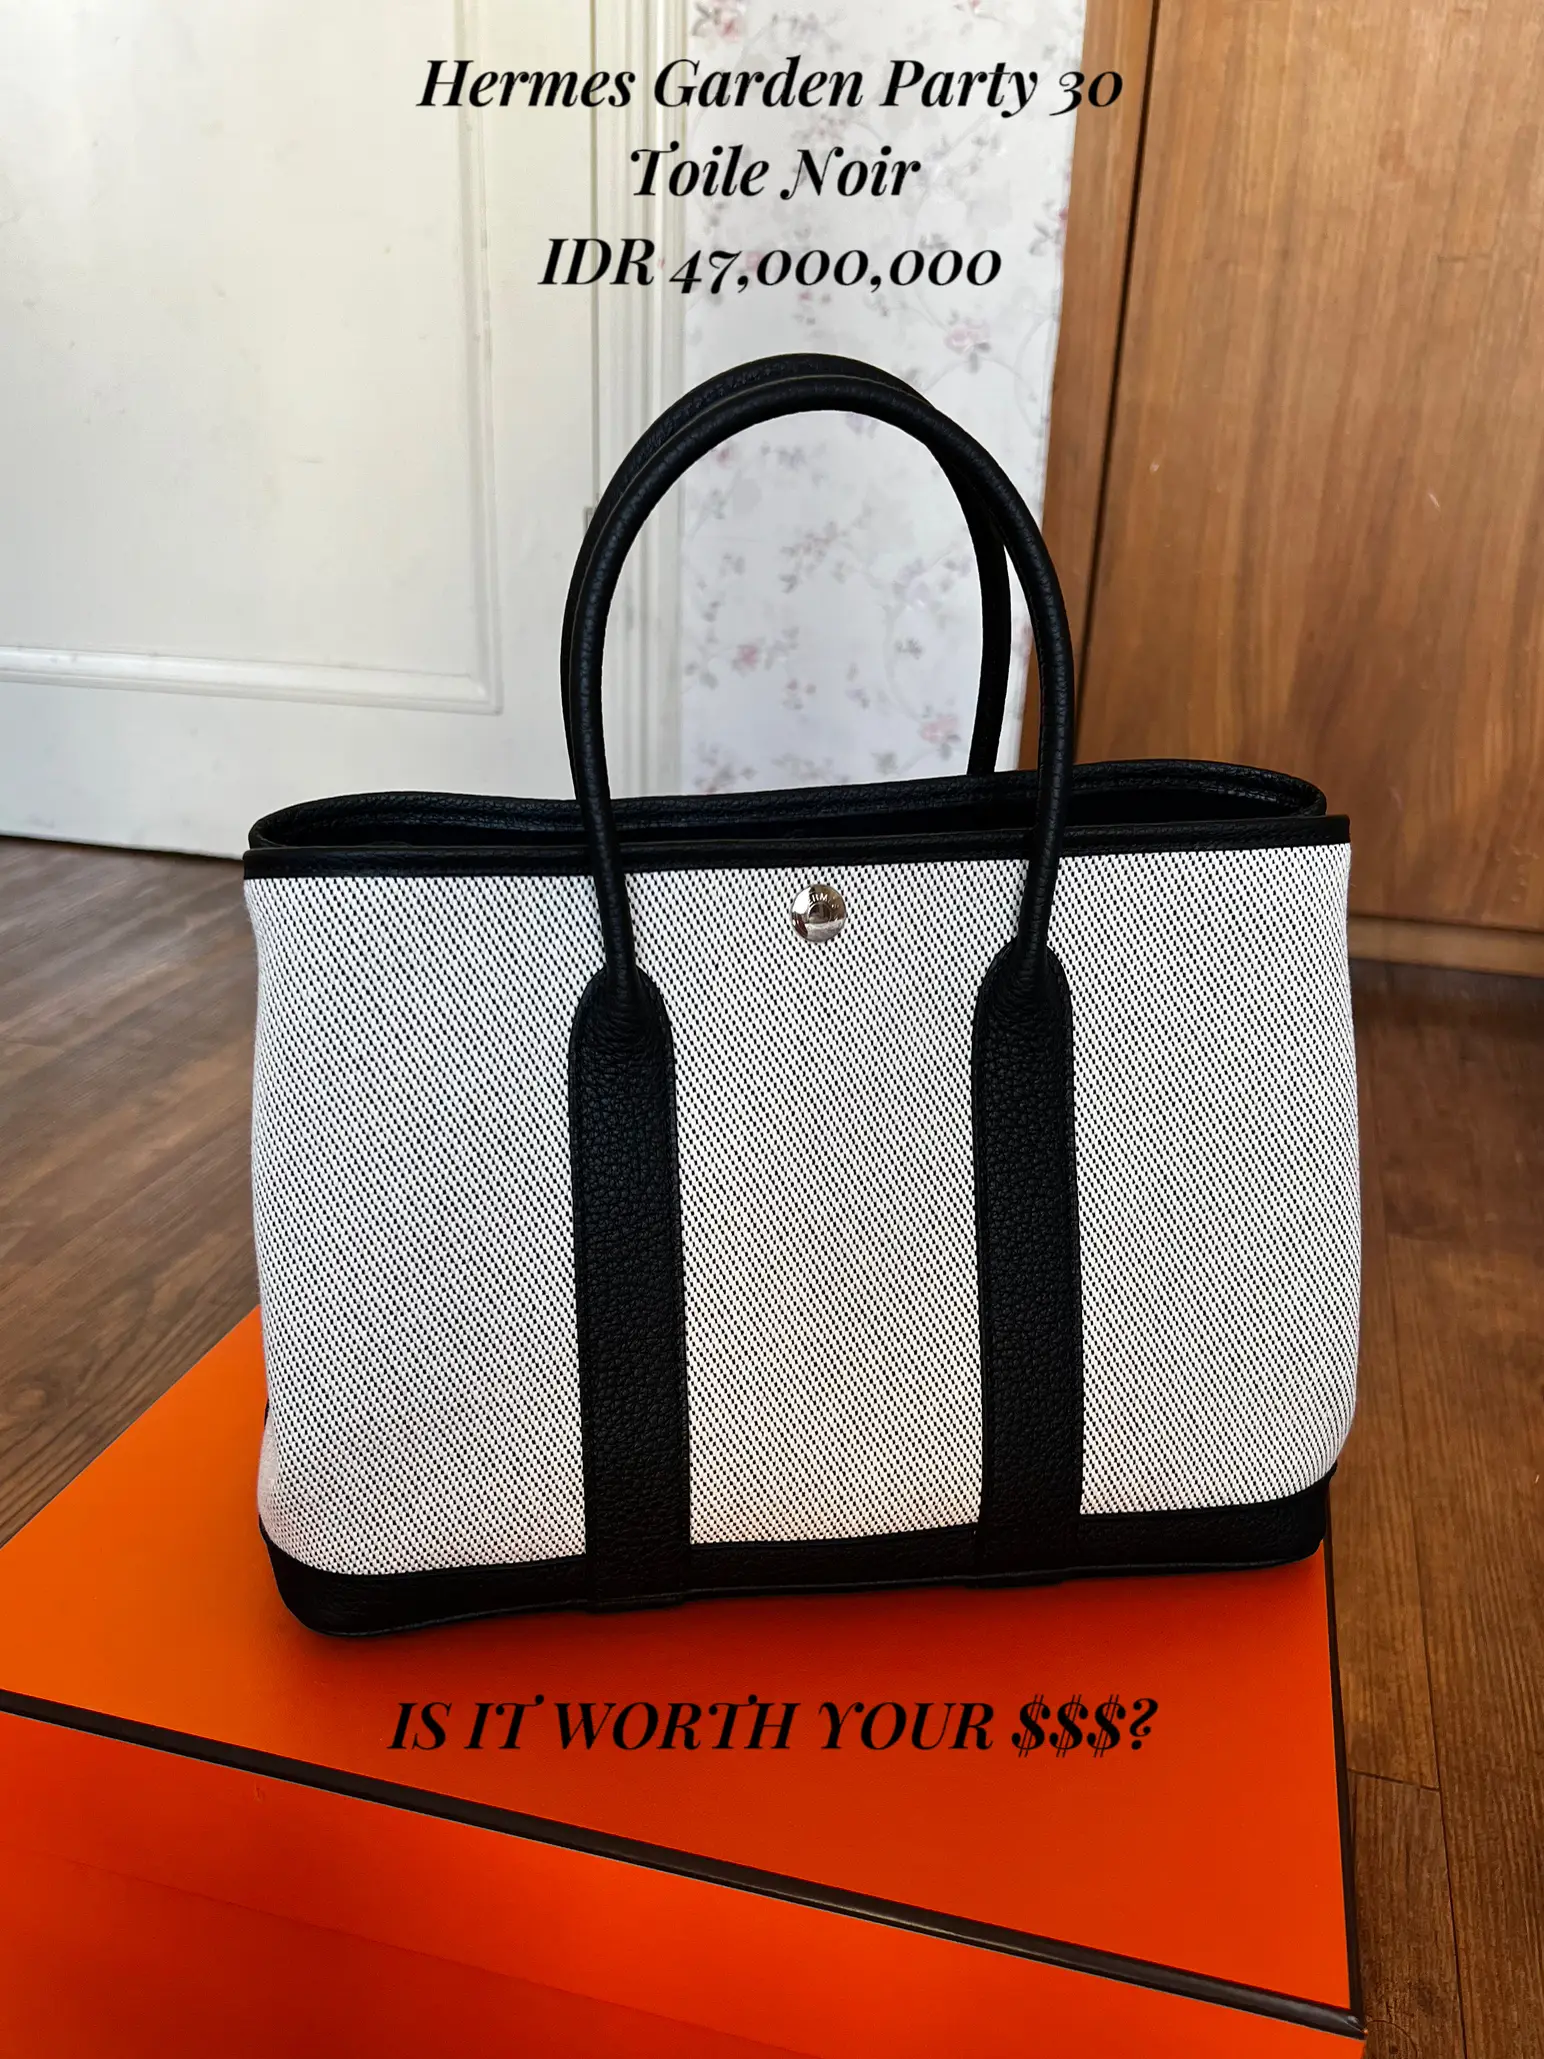 Hermes Entry Level Bag Comparison, Picotin VS Garden Party Pros and Cons